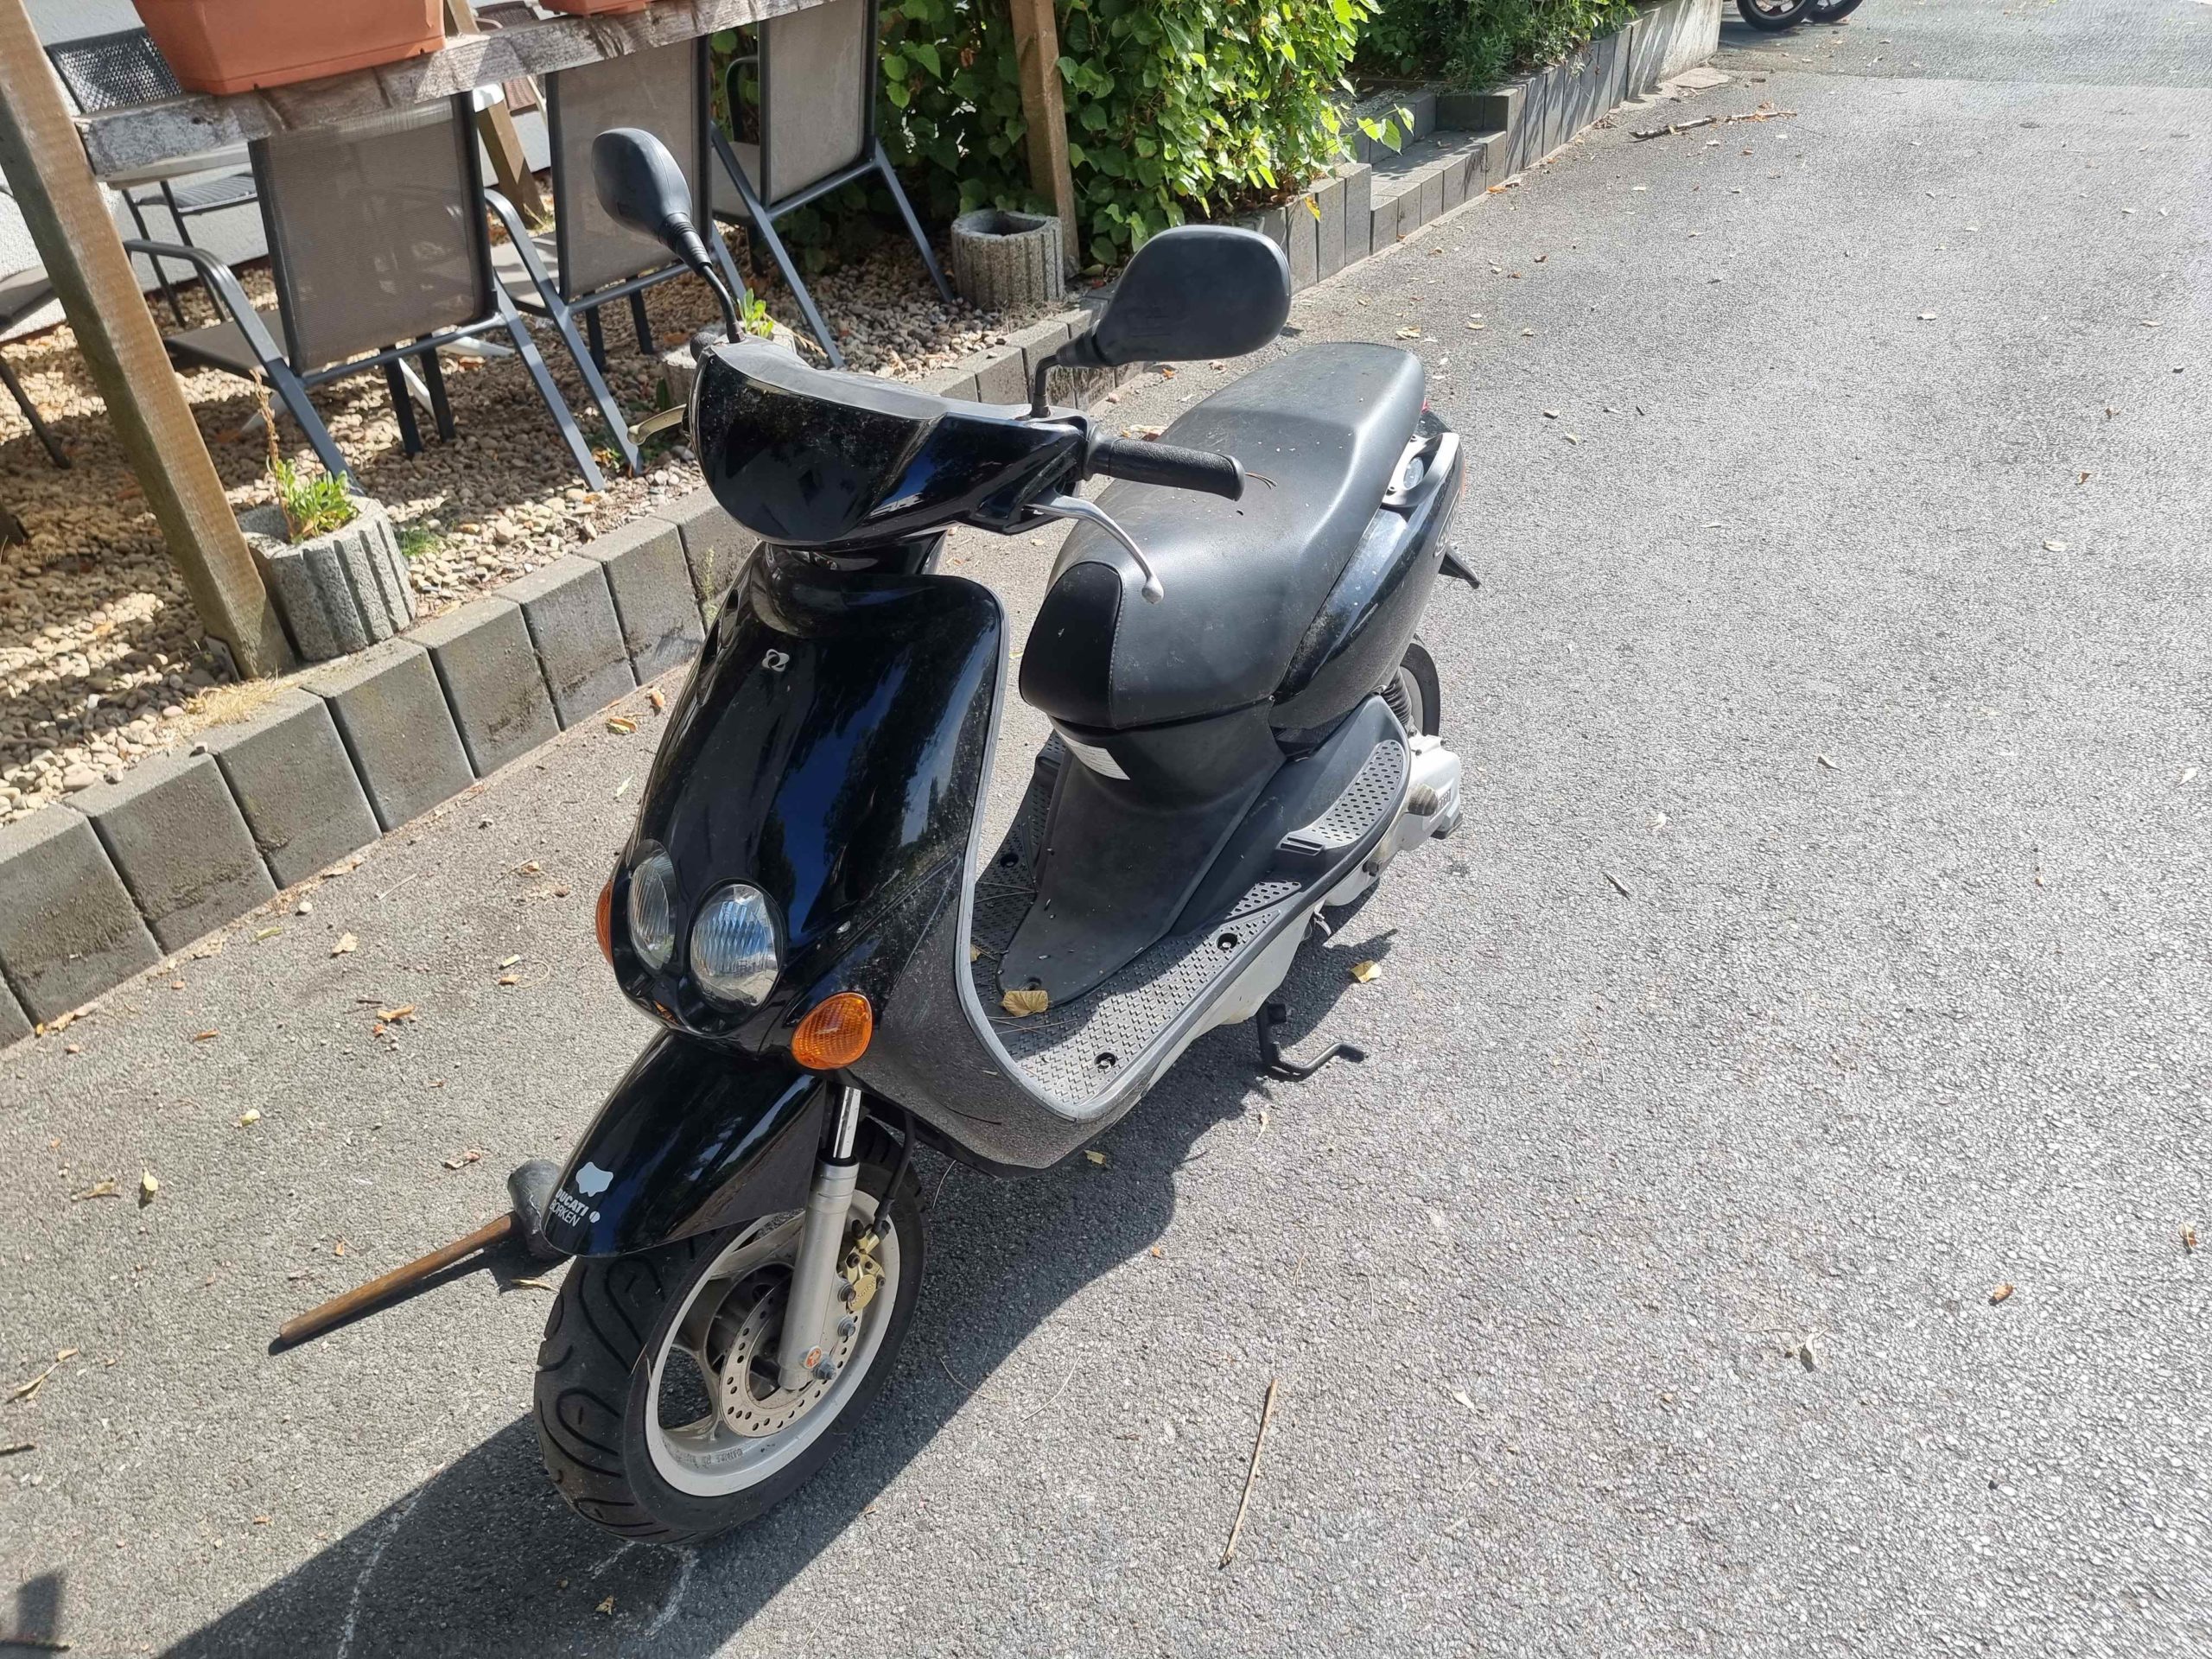 MBK Ovetto 100cc Maxiscooter